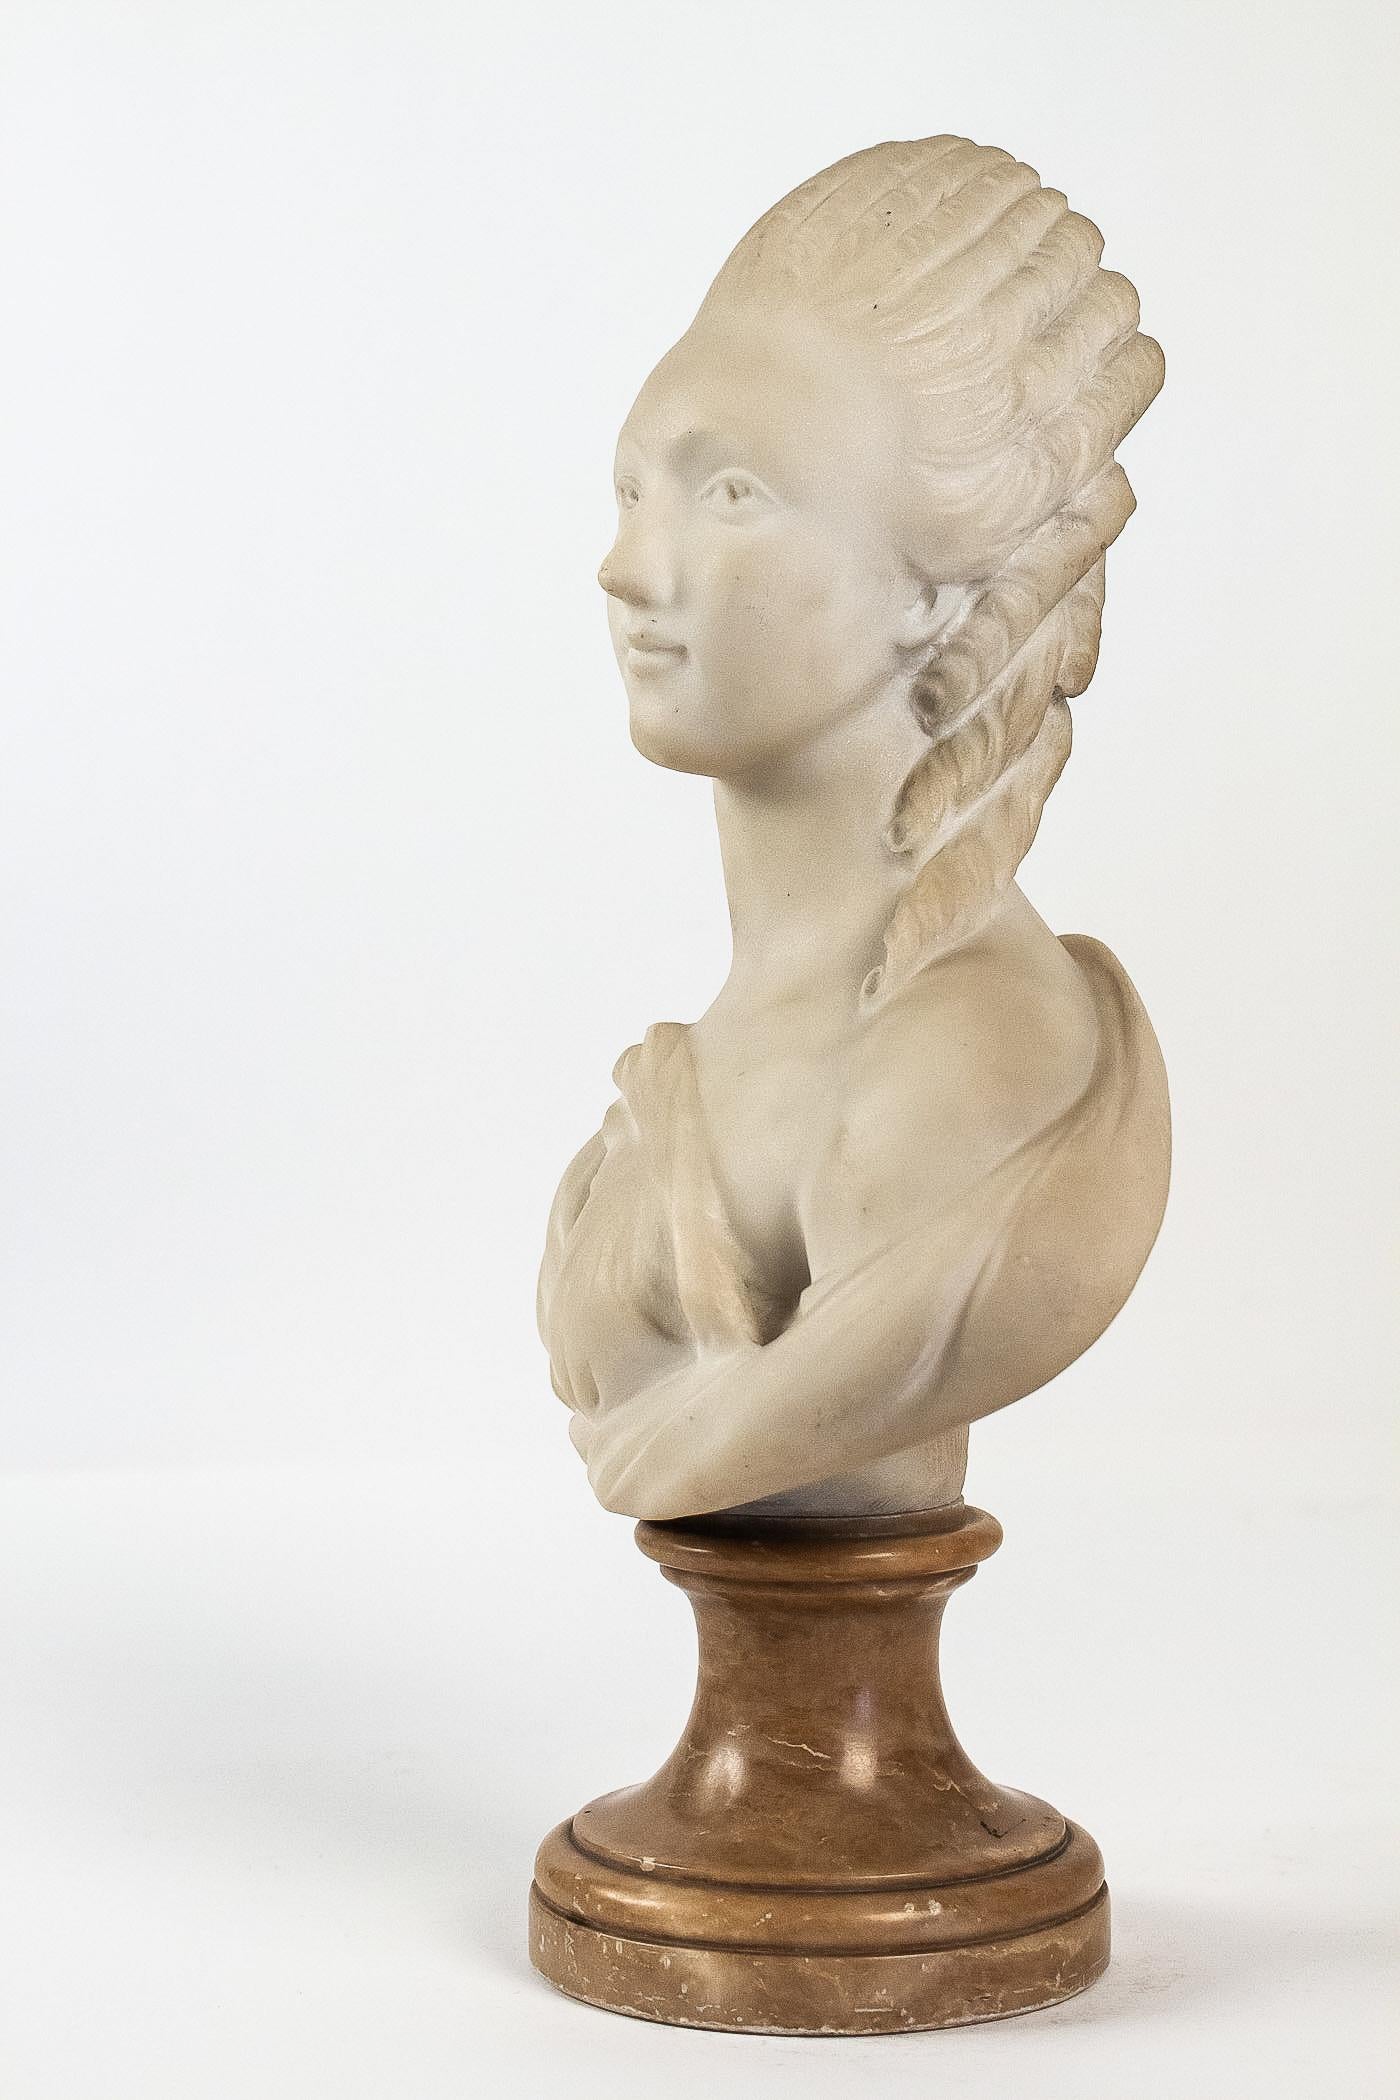 19th Century Small White Marble Bust of Countess du Barry, after Augustin Pajou